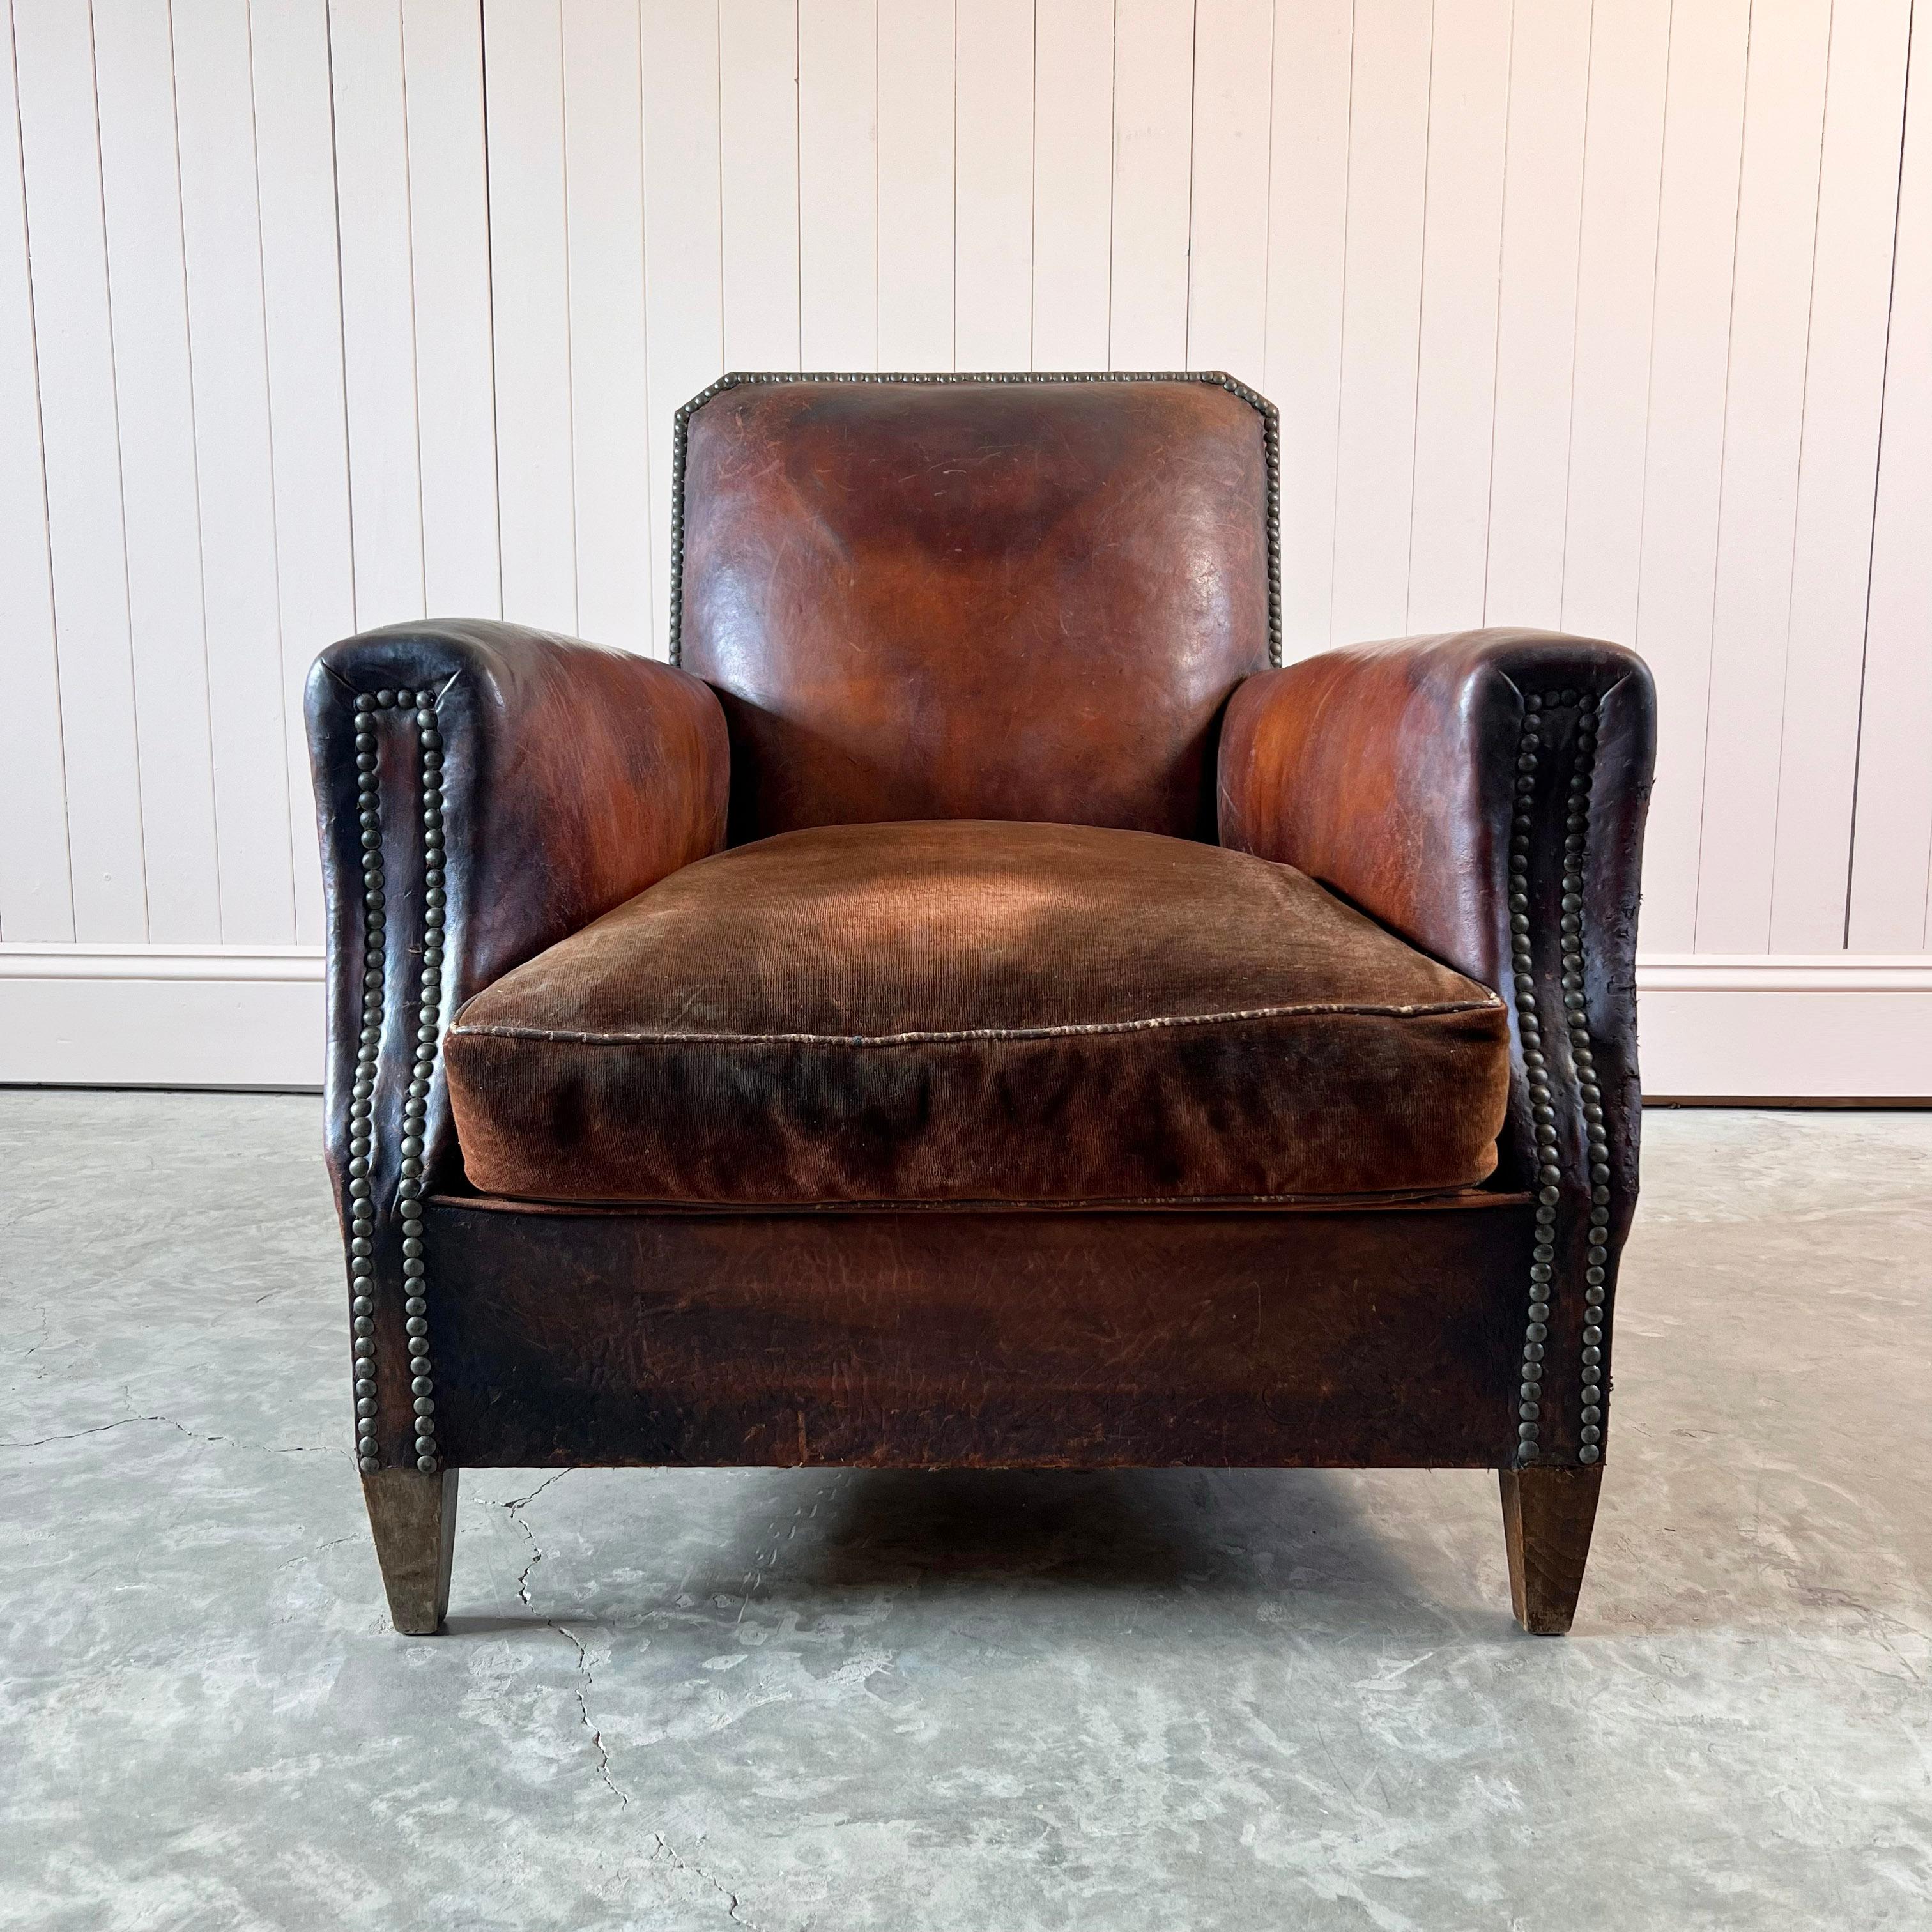 Circa 1900 this is a cracker of a French leather armchair.

Earlier than the more available club chairs, with just the most fantastic natural colour and patina to the leather.

This chair is 100% authentic, including the cushion and the springs,